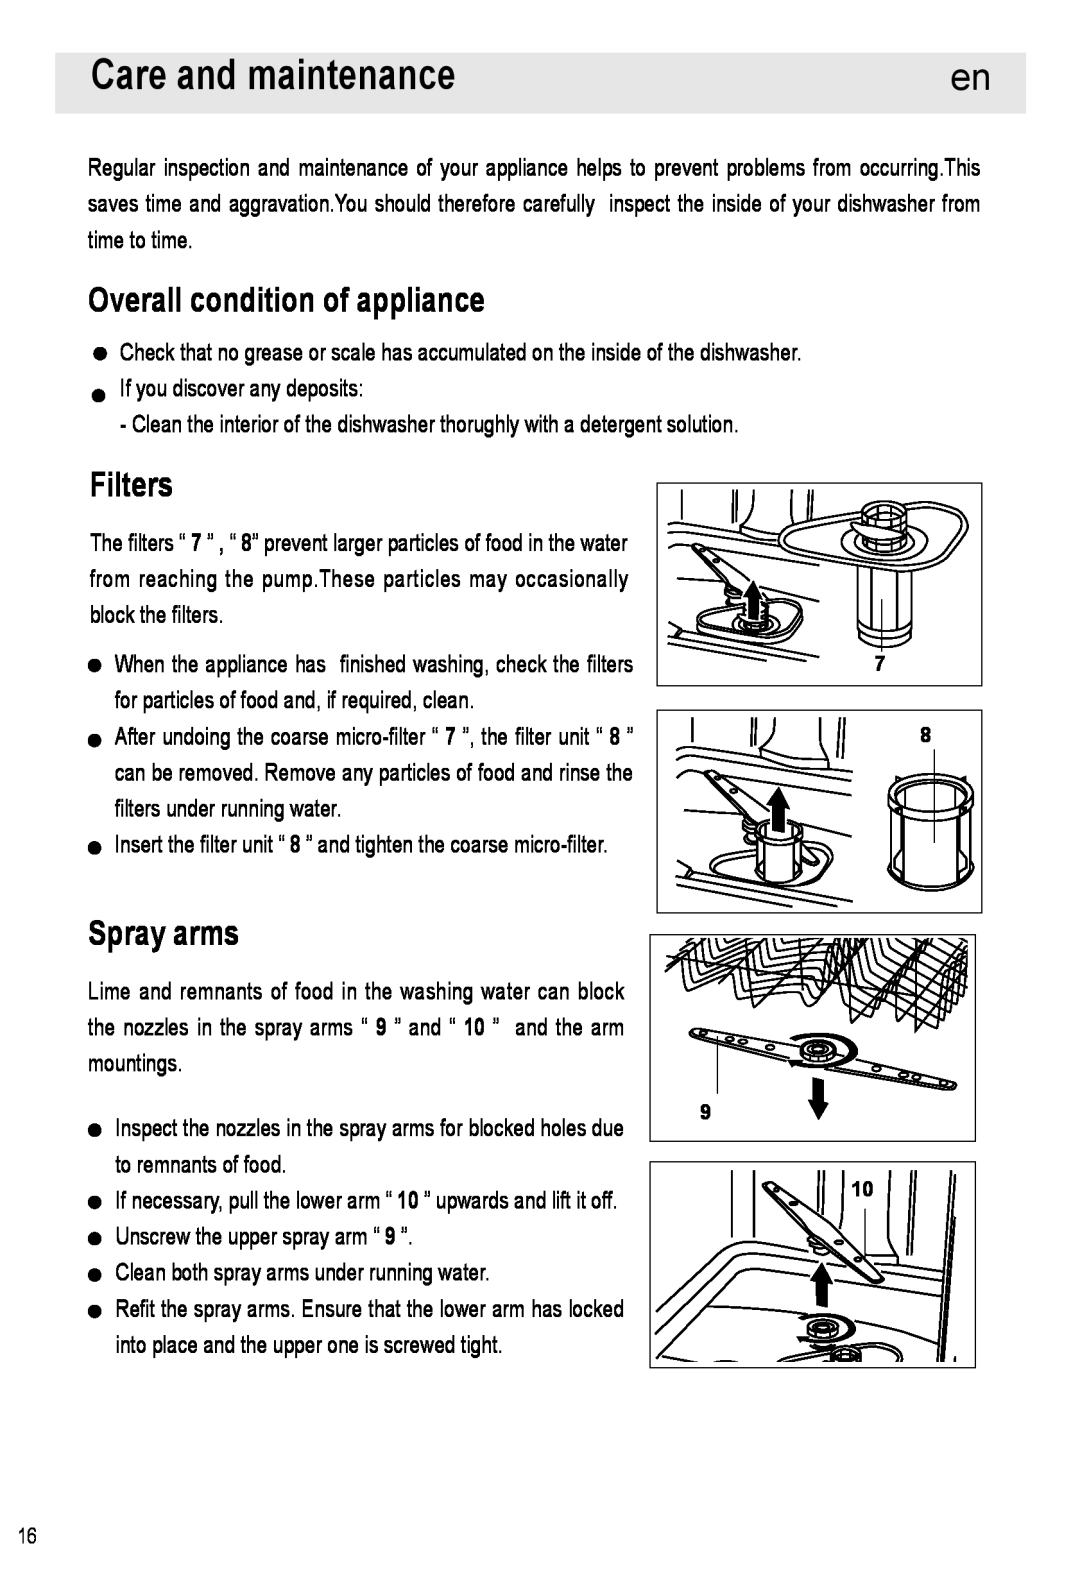 Haier HDW12-SFE1 operation manual Care and maintenance, Overall condition of appliance, Filters, Spray arms 